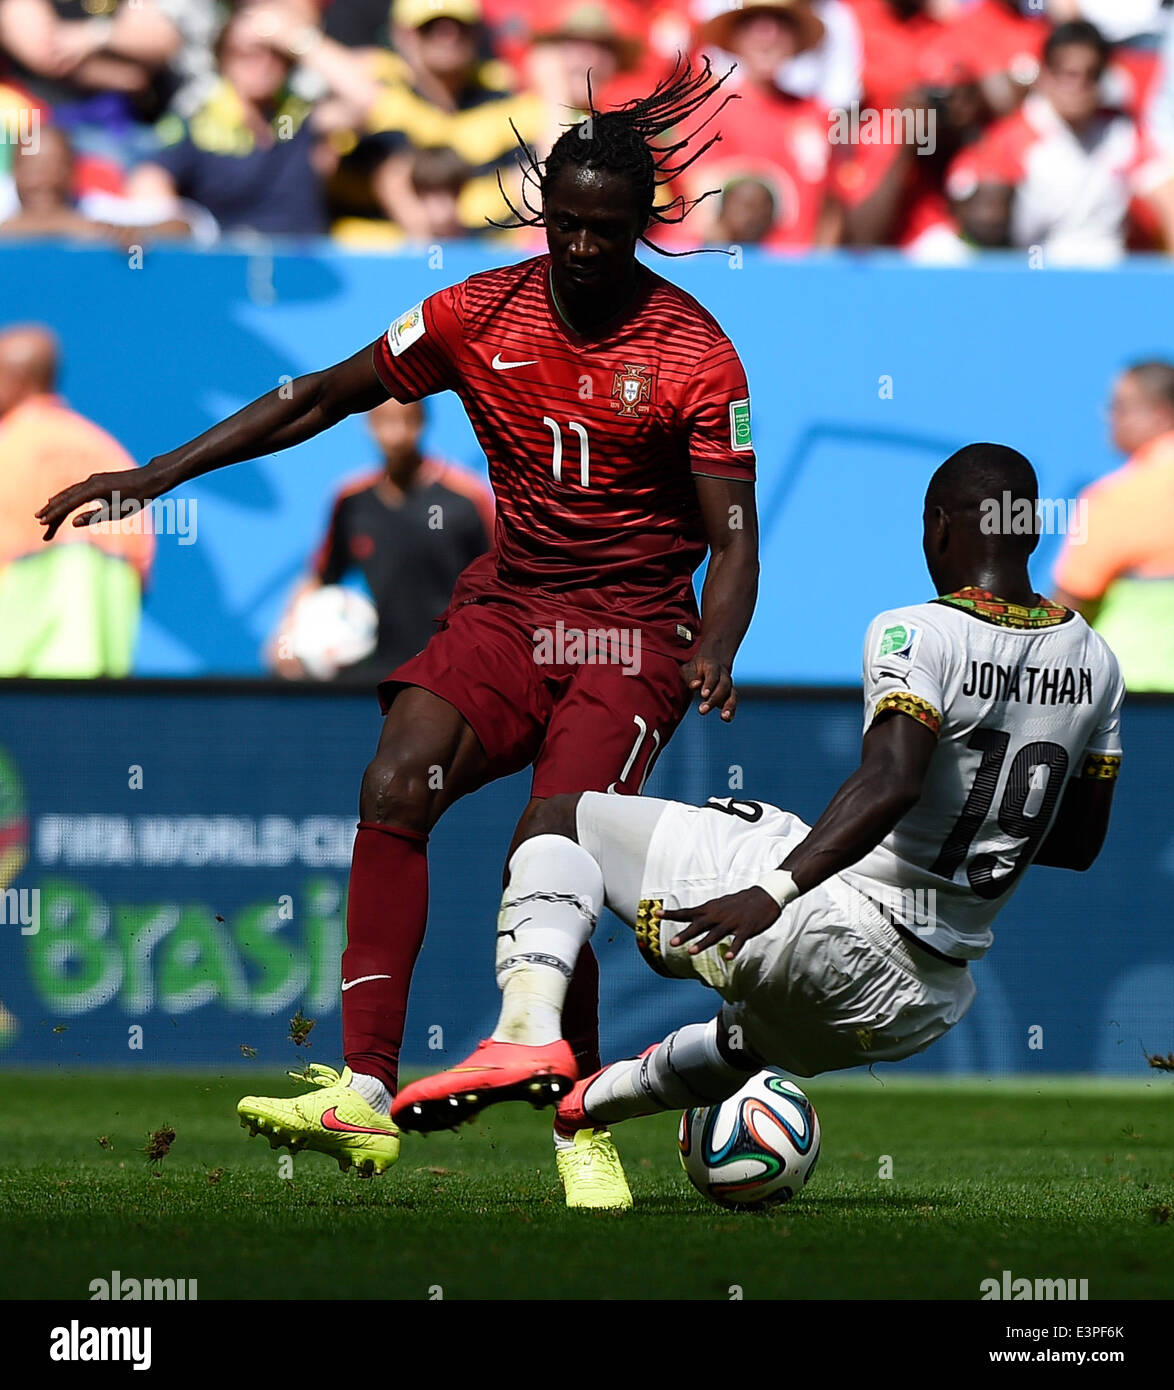 Brasilia, Brazil. 26th June, 2014. Portugal's Eder (L) vies with Ghana's Jonathan Mensah during a Group G match between Portugal and Ghana of 2014 FIFA World Cup at the Estadio Nacional Stadium in Brasilia, Brazil, June 26, 2014. Portugal won 2-1 over Ghana on Thursday. © Qi Heng/Xinhua/Alamy Live News Stock Photo